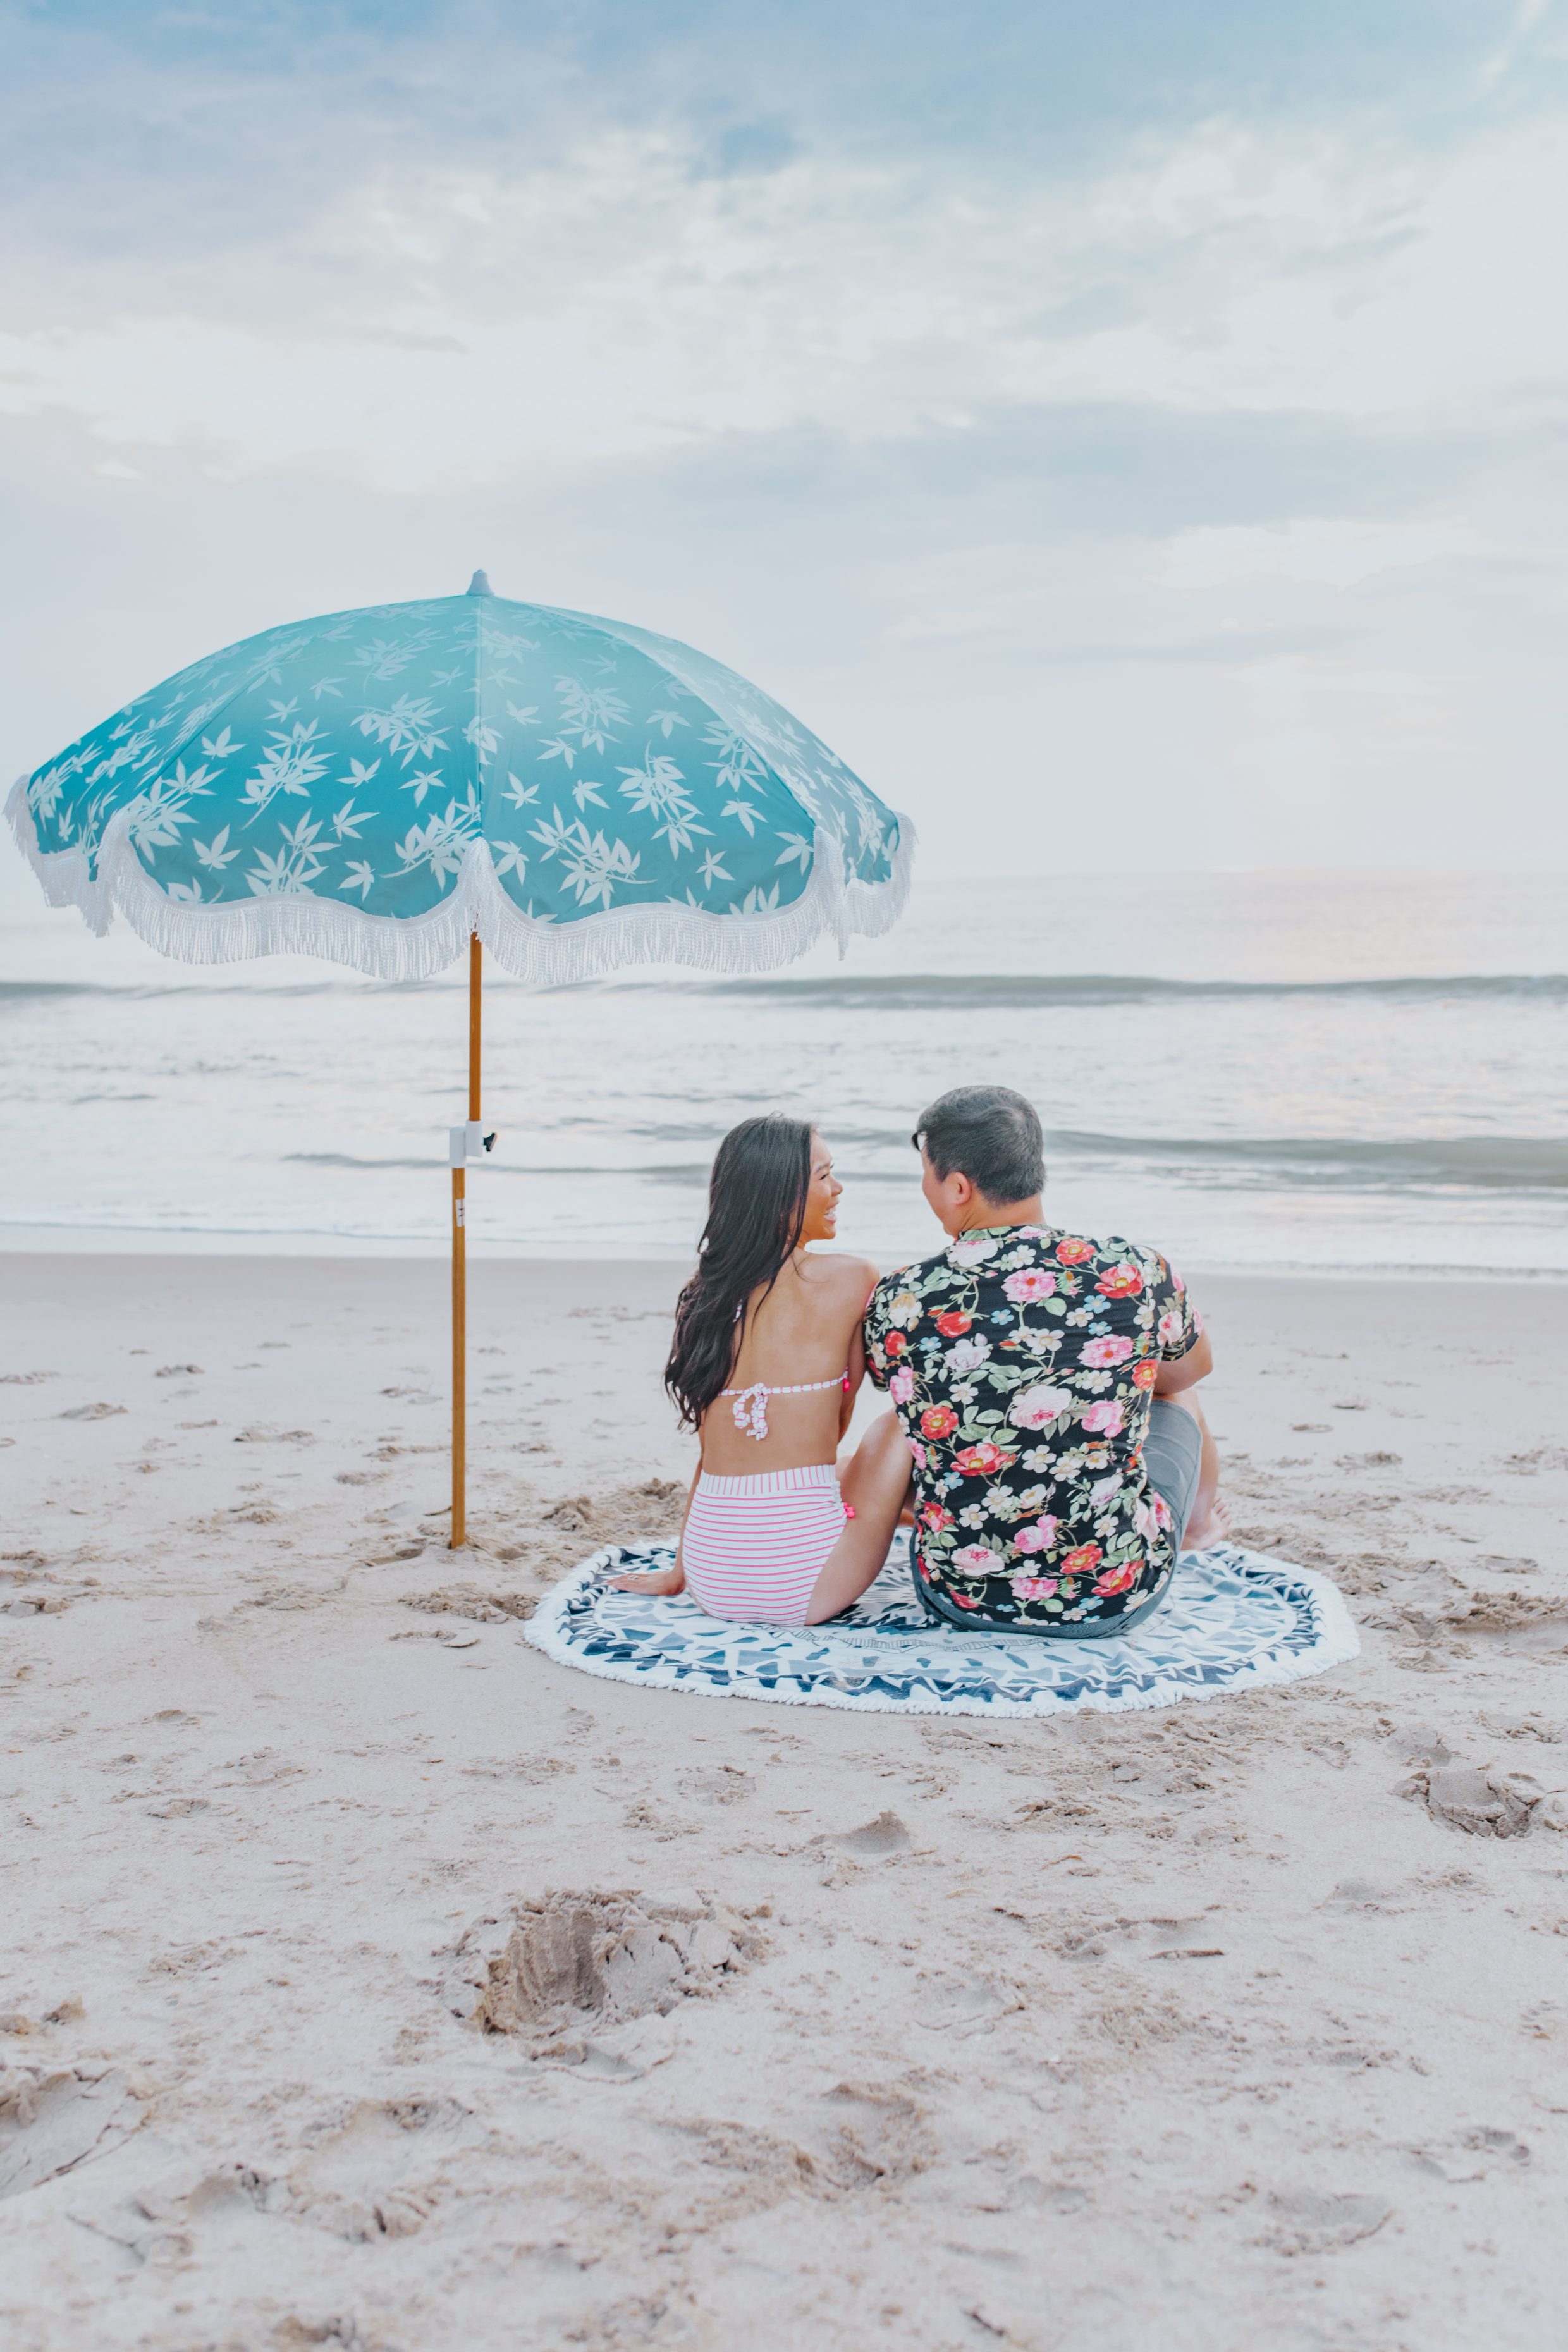 Blogger Hoang-Kim and her boyfriend Jonathan Van at the Virginia Beach Oceanfront with a beach umbrella and round towel